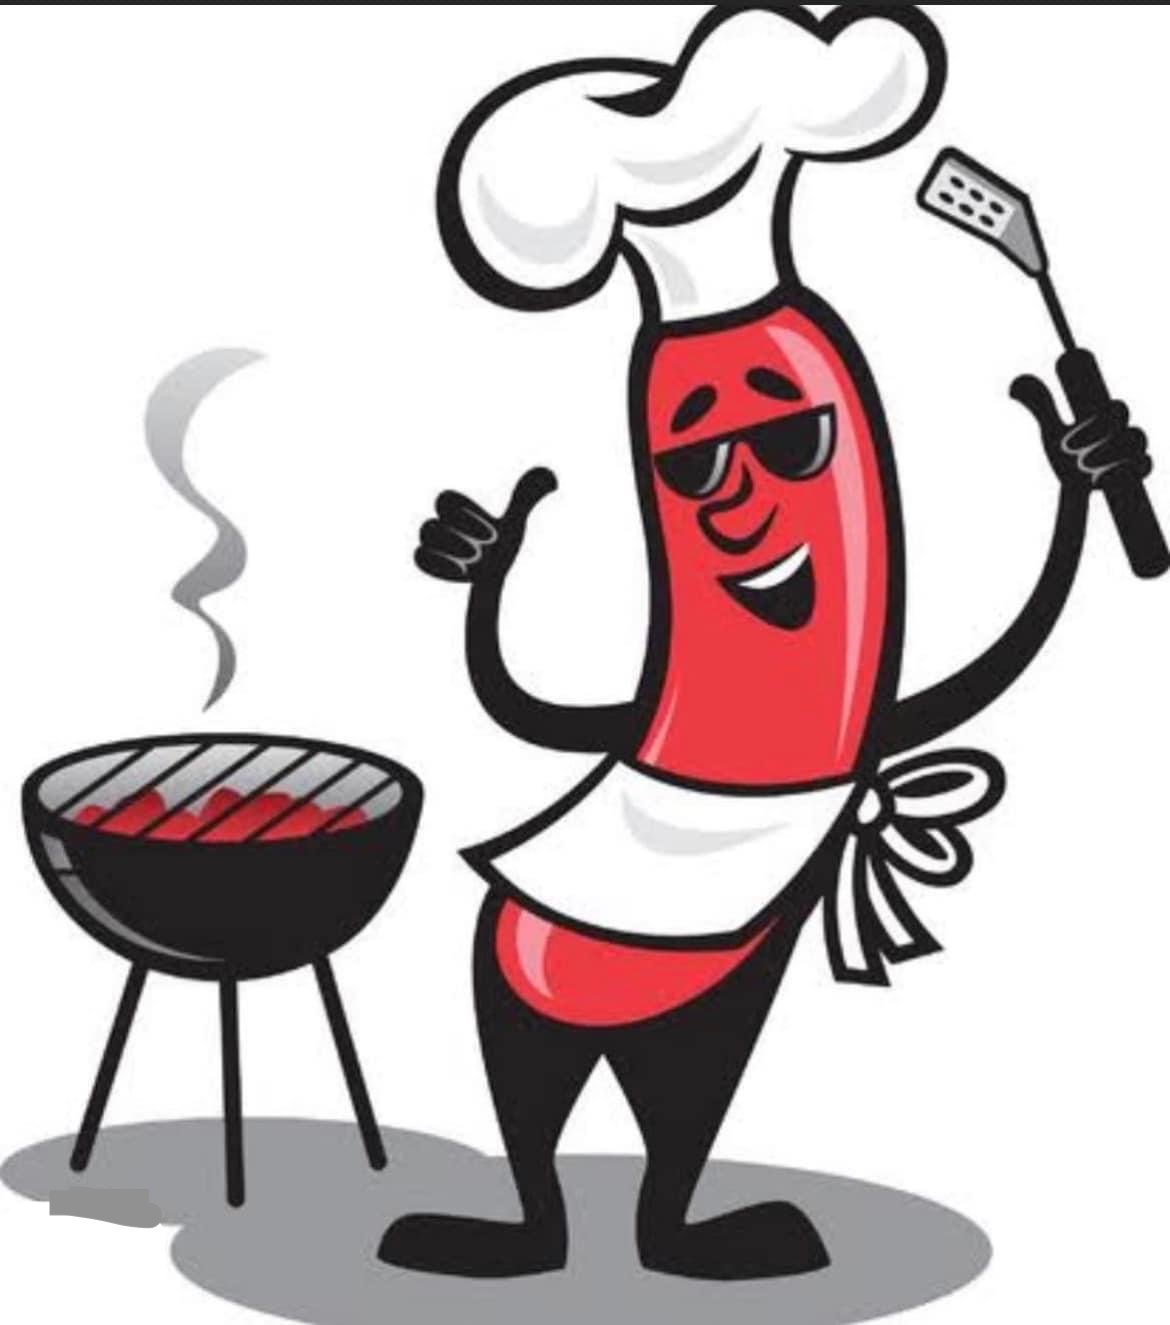 IMG_sausage sizzle clipart.JPG